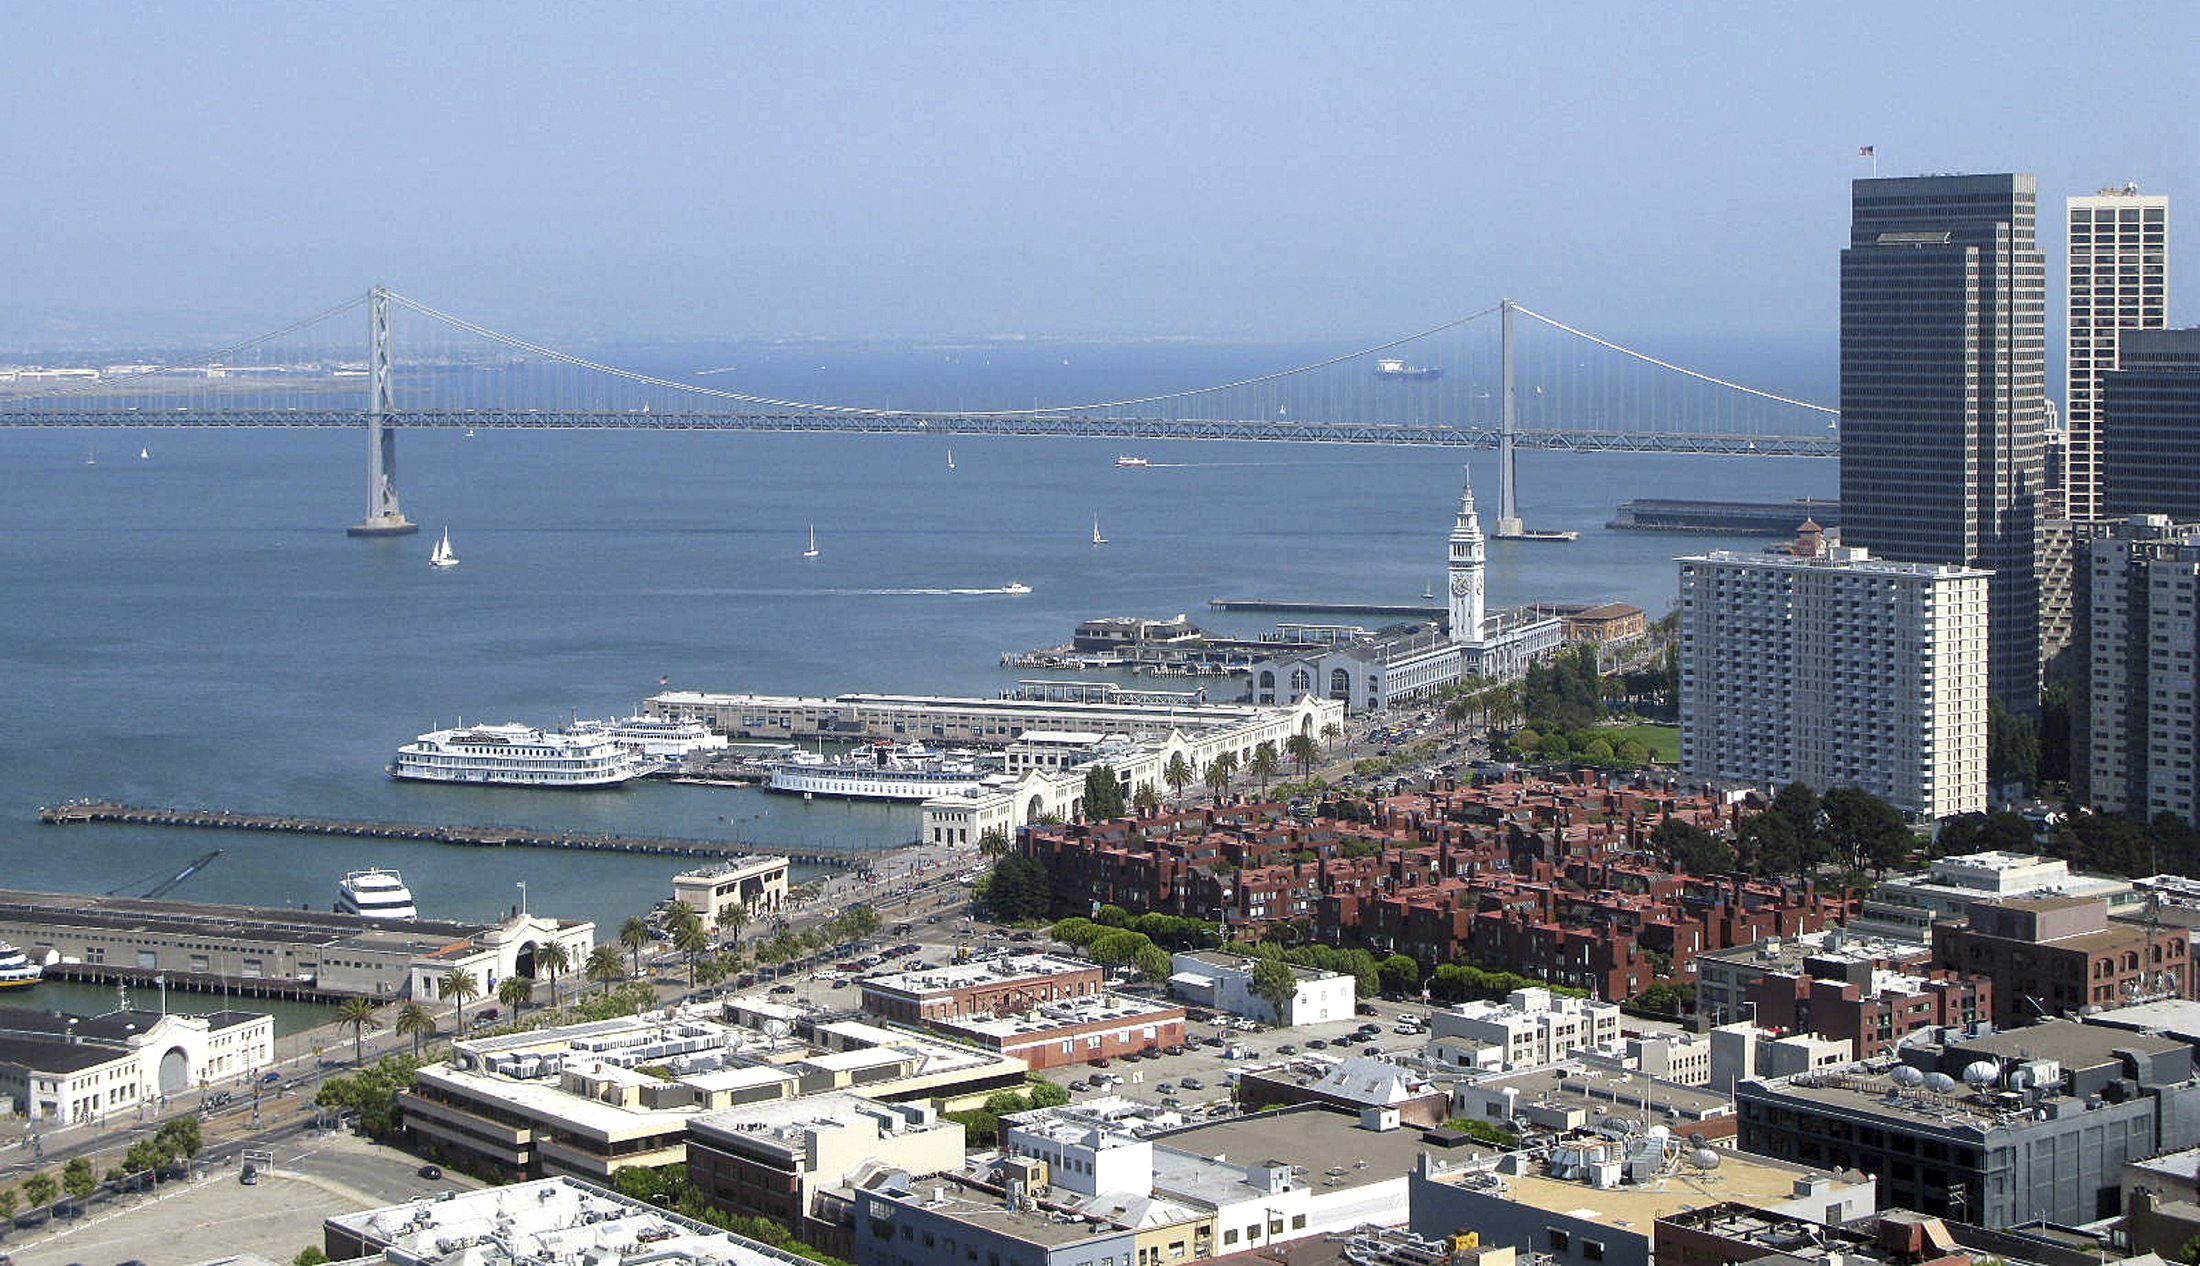 The Embarcadero district of San Francisco looking toward the Oakland Bay Bridge is seen from the Coit Tower in this photo taken July 13, 2008. A 27.1 percent slump in June from a year earlier pushed the median price paid for a home in the San Francisco Bay area, one of the priciest U.S. housing markets, to below $500,000 for the first time in four years, a report said July 17, 2008. Photo taken July 13, 2008. REUTERS/Lisa Baertlein